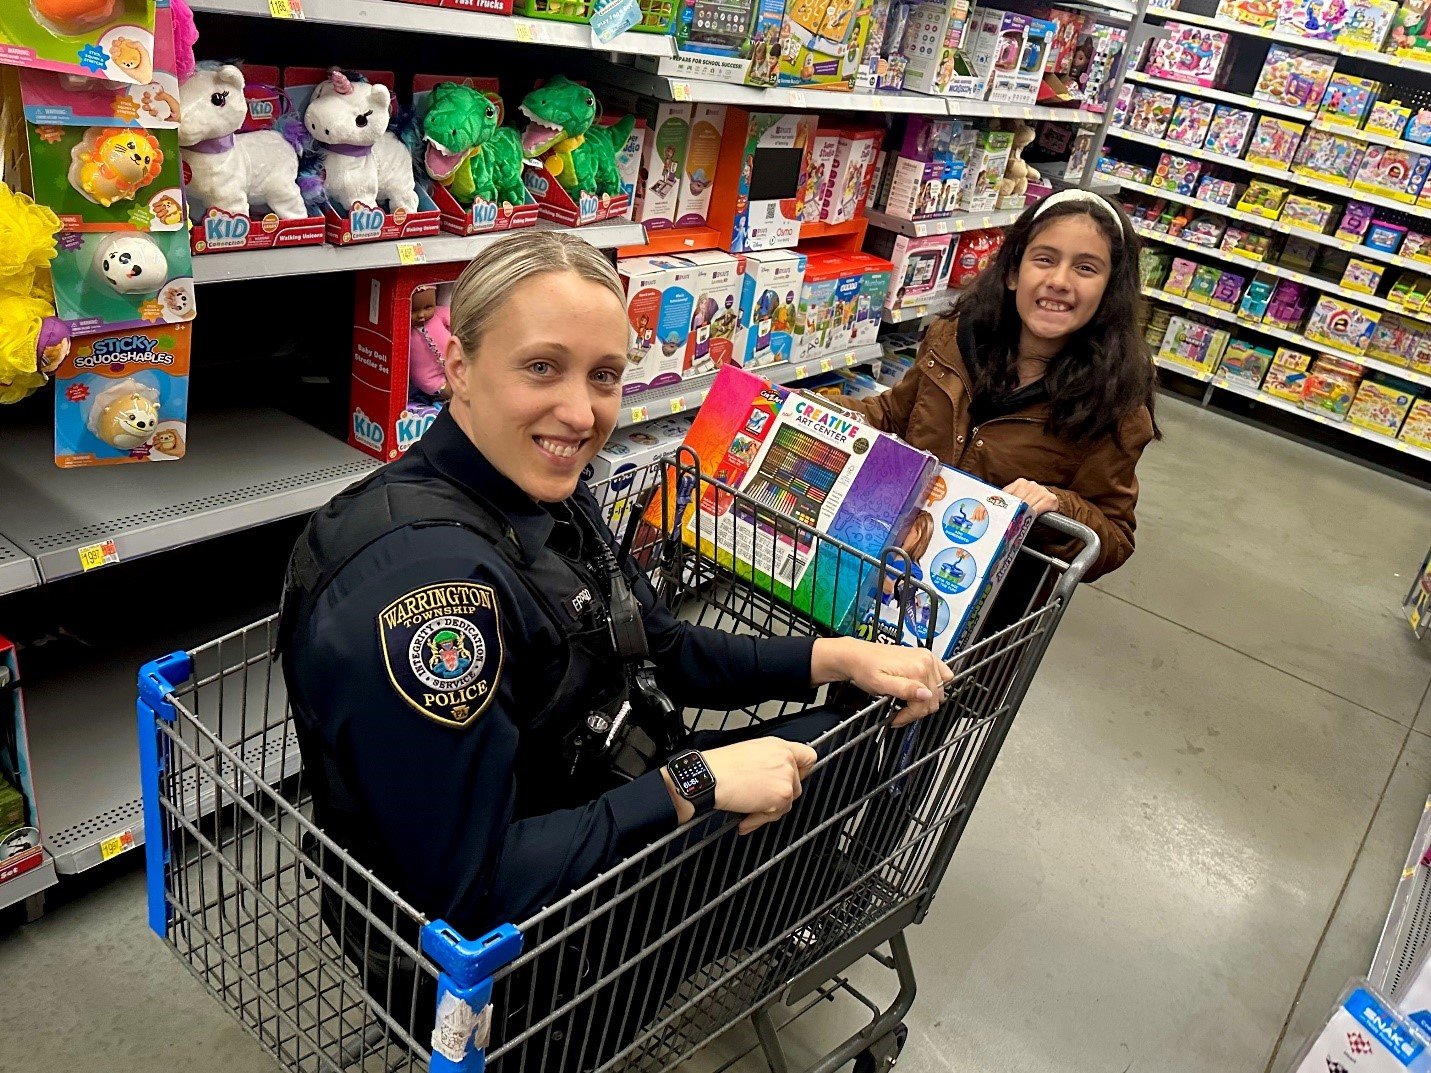 Warrington Township Police Officer Kimberly Errigo gets carried away at the “Shop with a Cop” event at the local Walmart Supercenter.